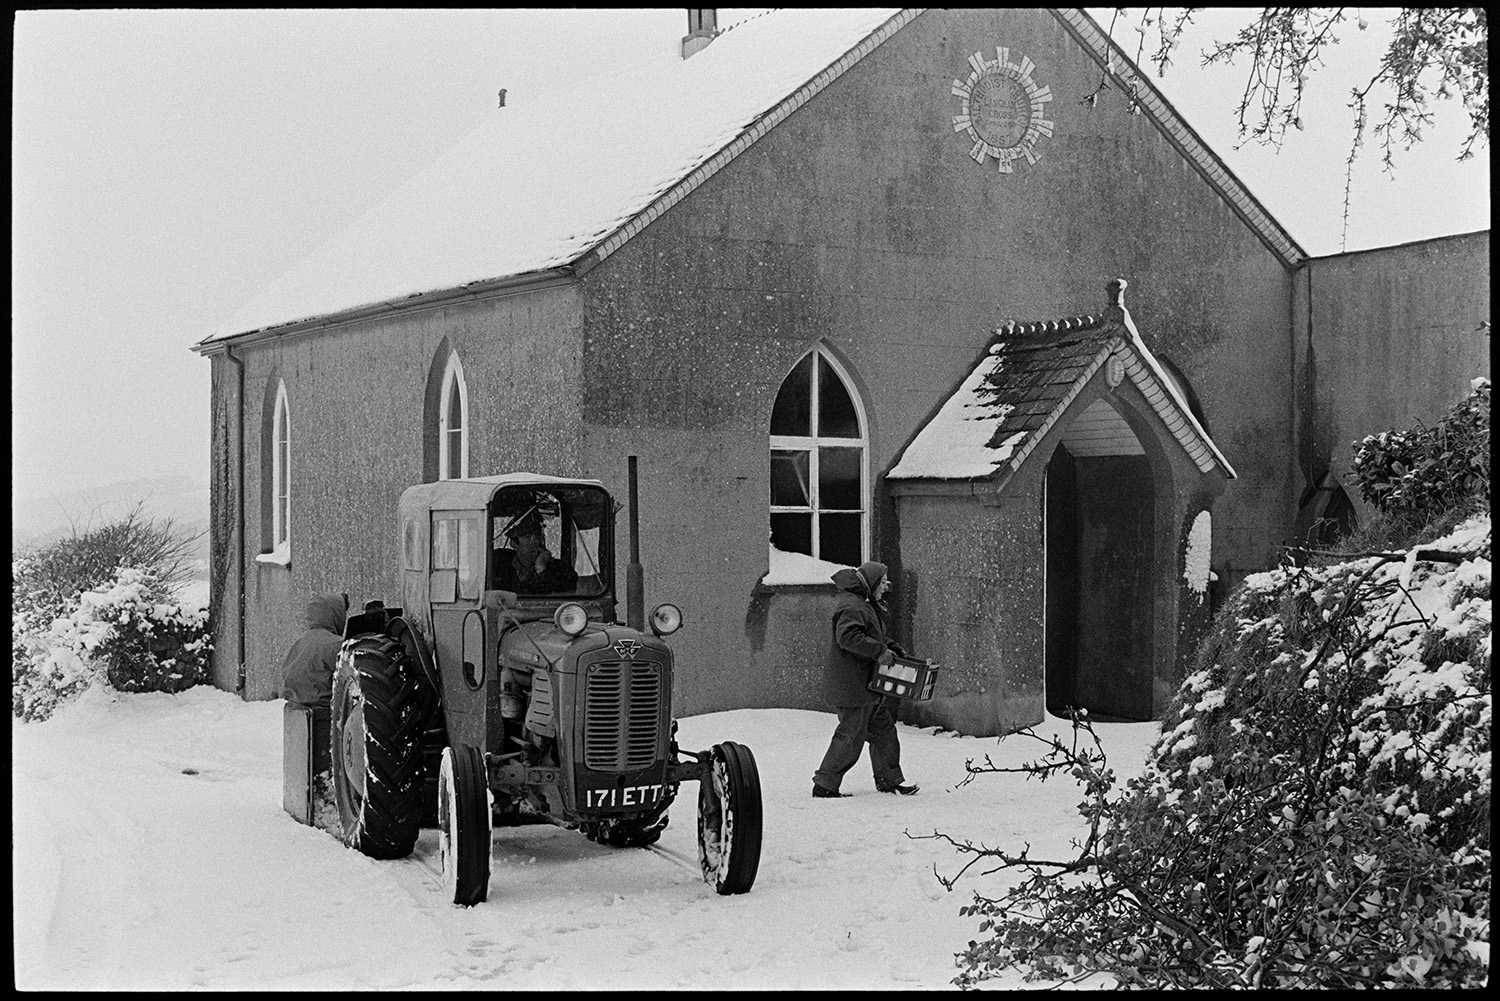 Snow, delivering milk with tractor. 
[Dorothy Hiscock delivering a crate of milk to a building, possibly a chapel, at Langham, Dolton. A tractor is transporting her on the milk round and a person can be seen sat in the link box attached to the tractor.]